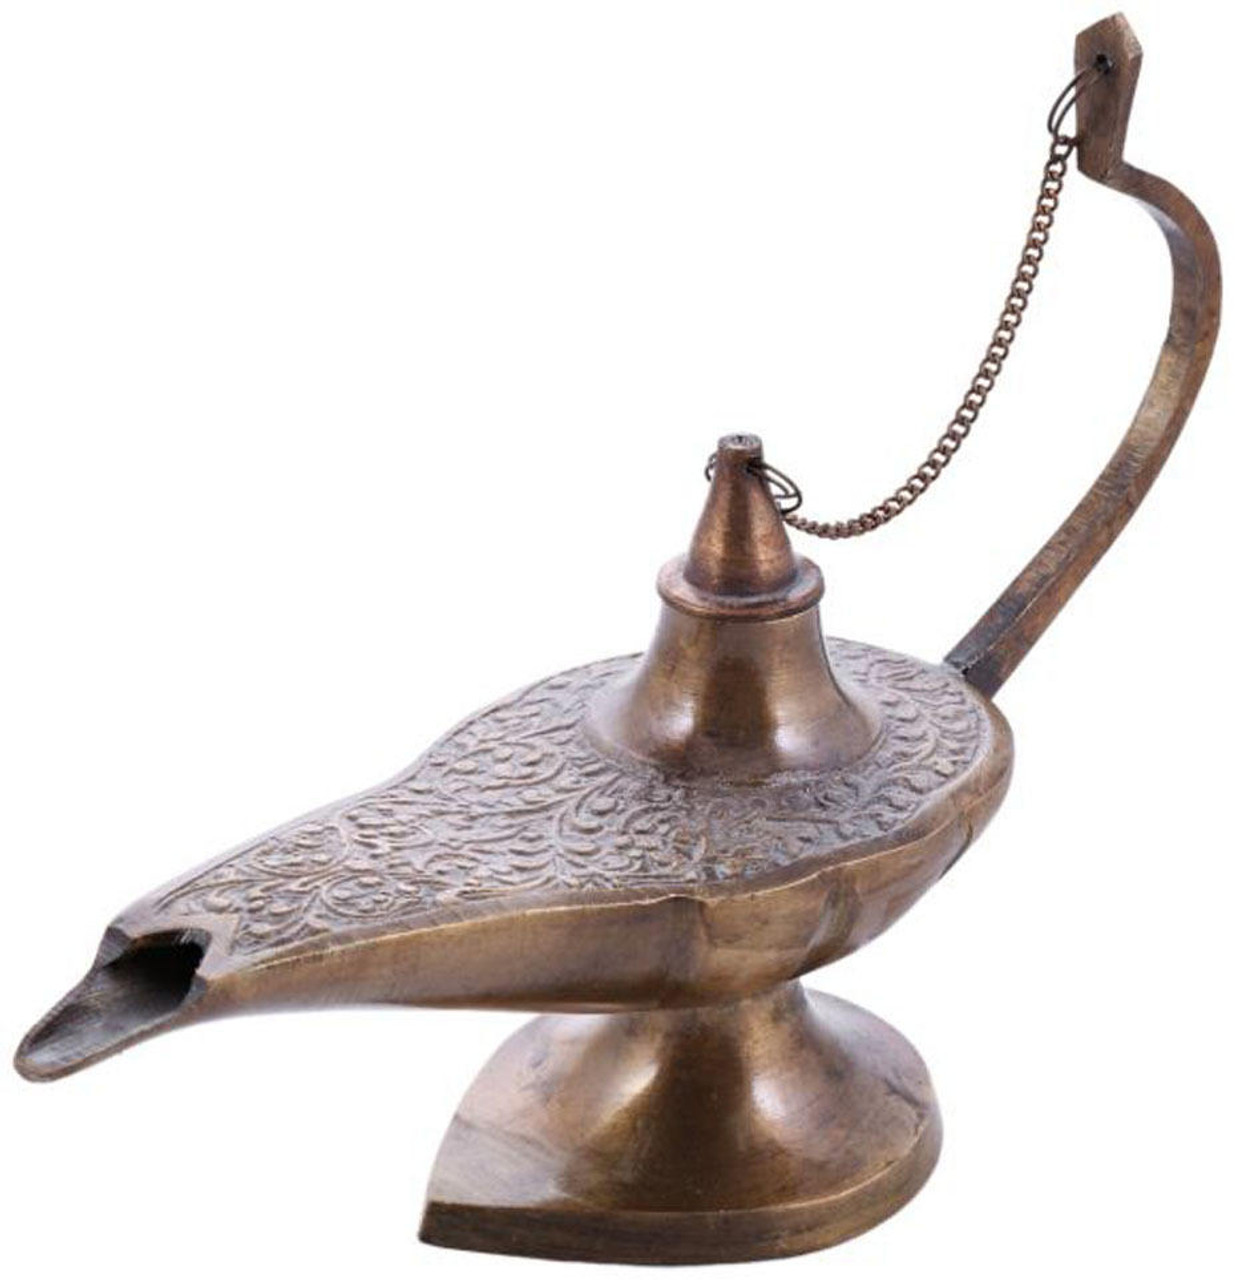 Authentic Aladdin Lamp from UAE - Great Gift Idea .